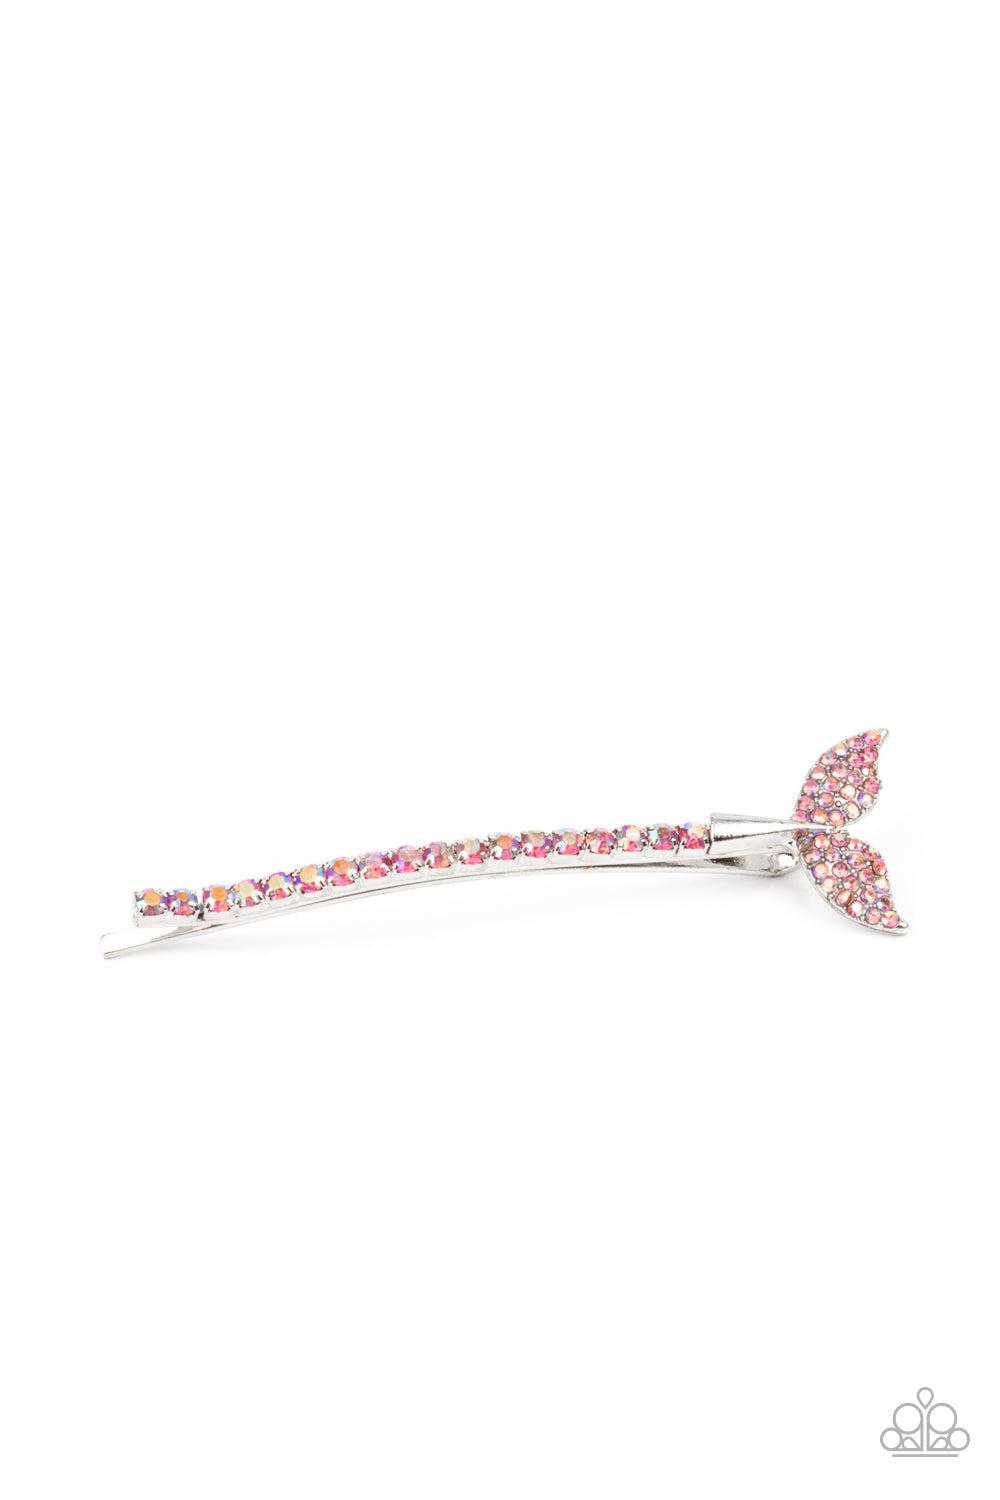 Deep Dive Pink Mermaid Tail Hair Pin - Paparazzi Accessories- lightbox - CarasShop.com - $5 Jewelry by Cara Jewels